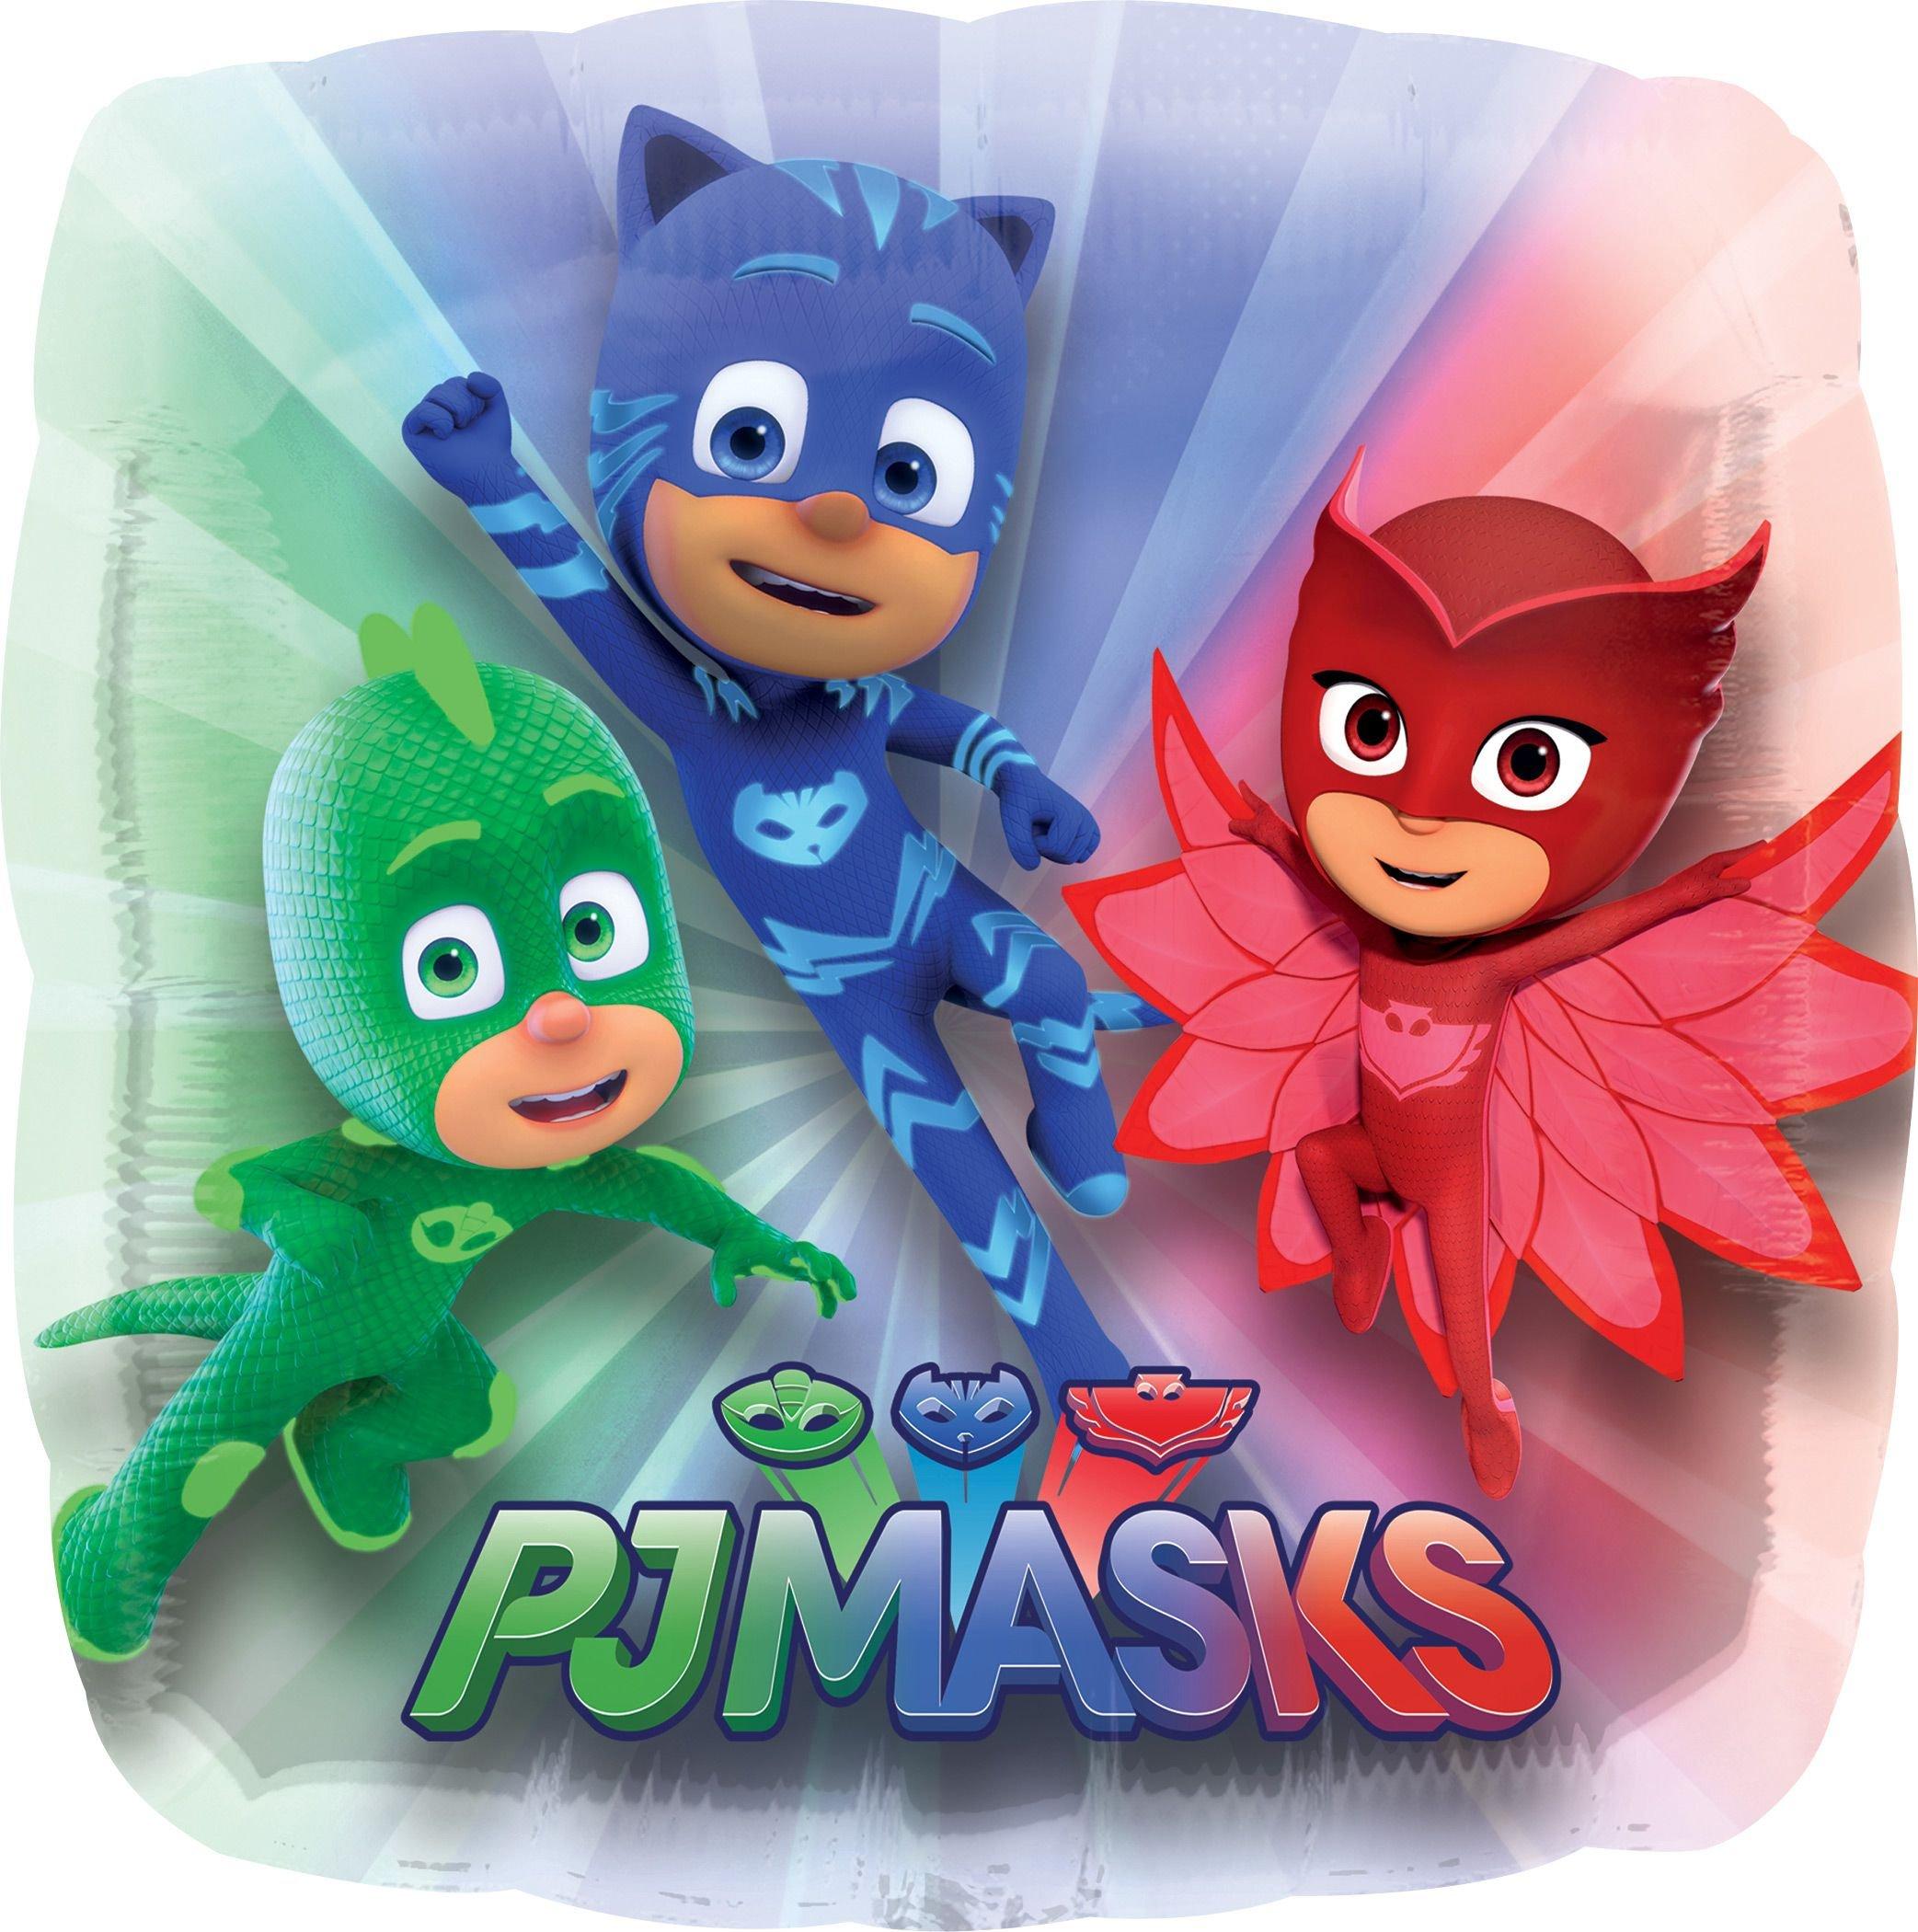 Giant PJ Masks Balloon 28in x 28in | Party City